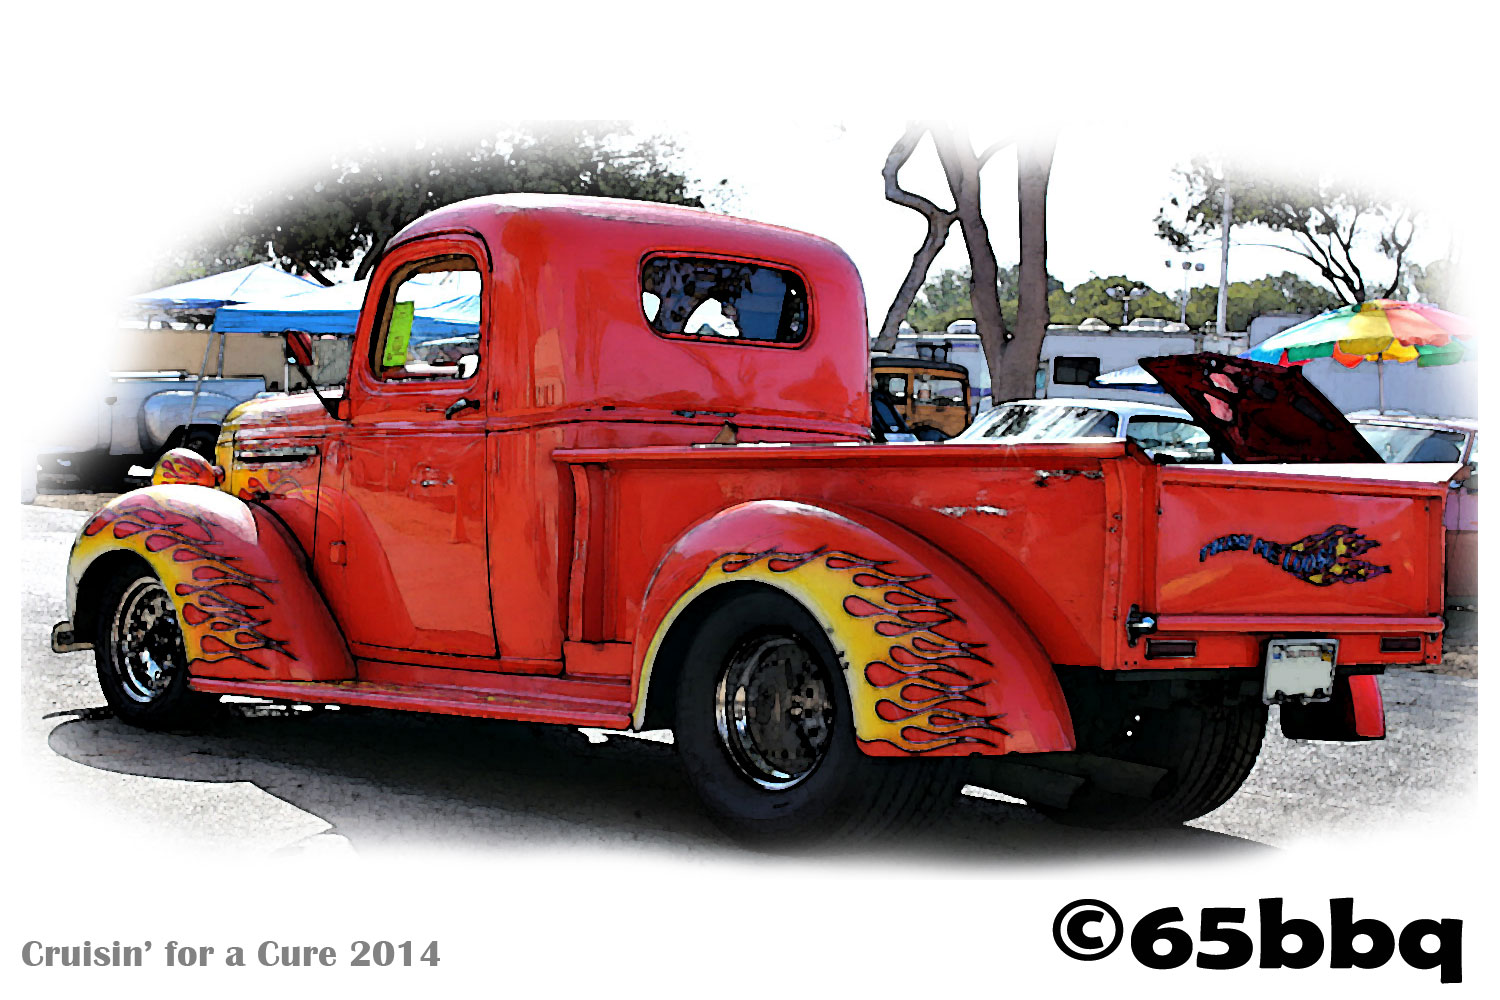 cruisin-for-a-cure-201465bbq-flames-2014.jpg